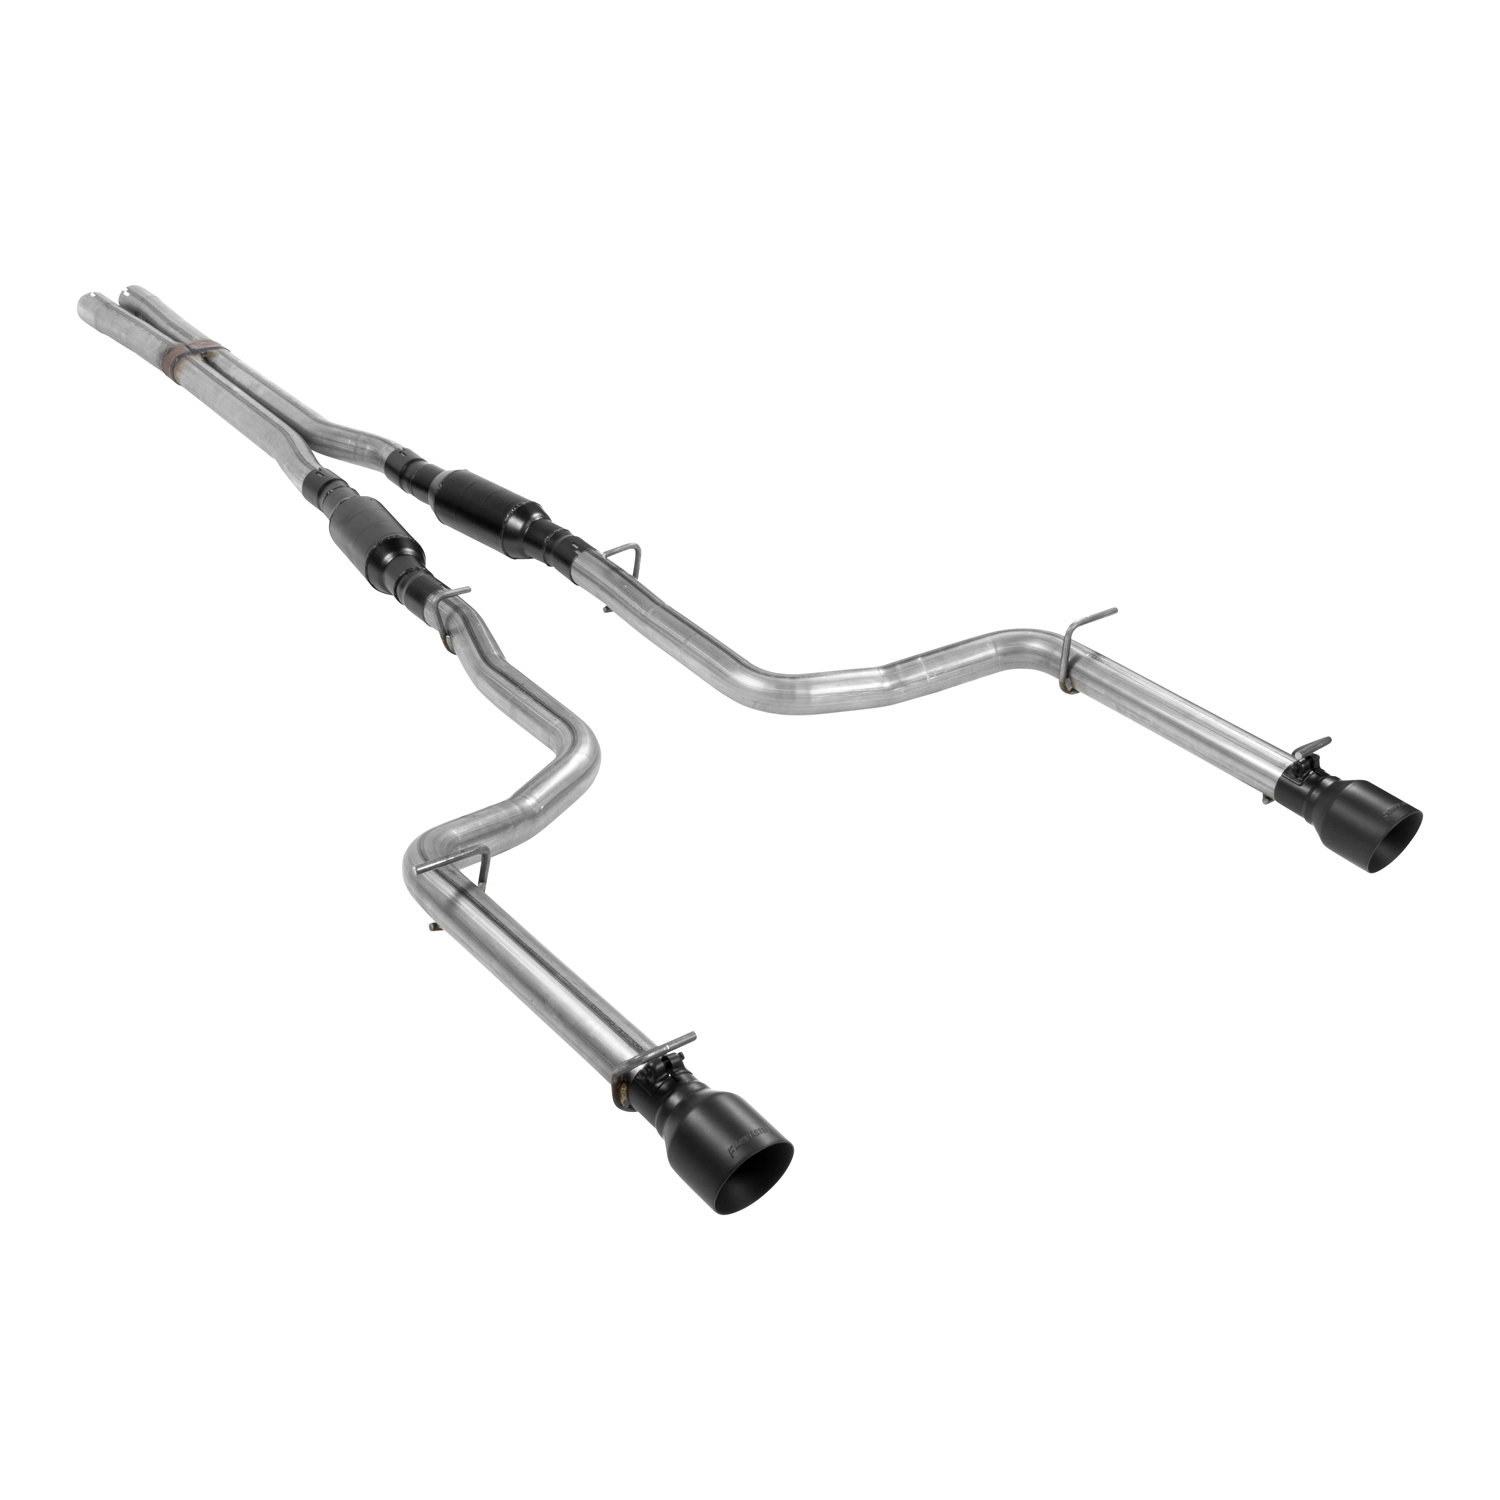 2005-2010 Dodge Charger R/T, Magnum R/T & Chrysler 300C with 5.7L V8 Engine Outlaw Cat-Back Exhaust System